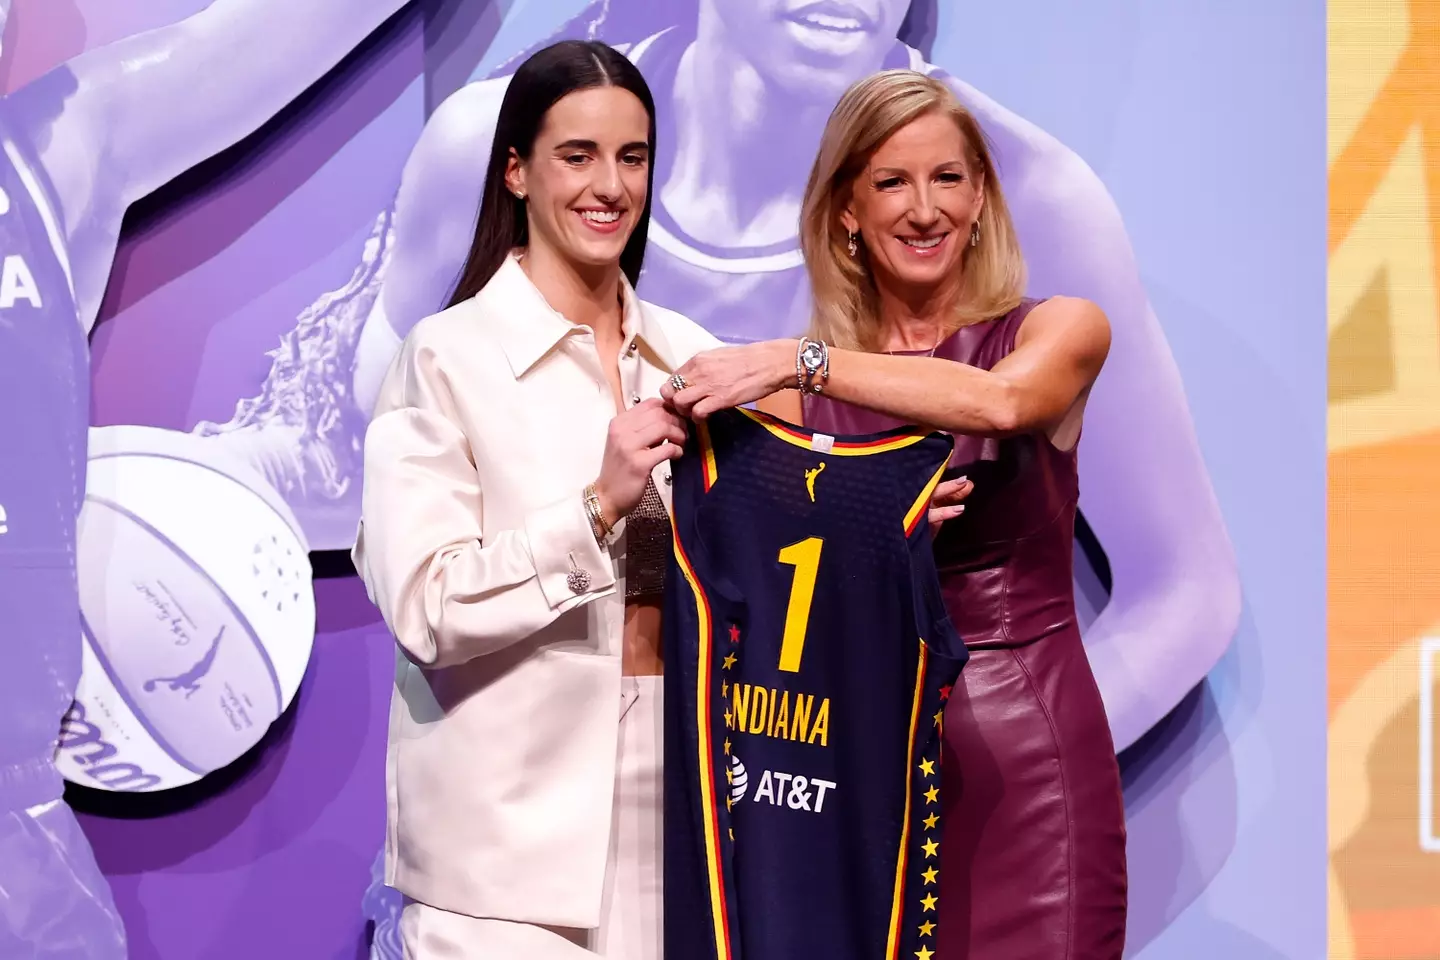 Caitlin Clark has had to deal with lots of criticism on social media before even playing her first WNBA game. (Sarah Stier/Getty Images)